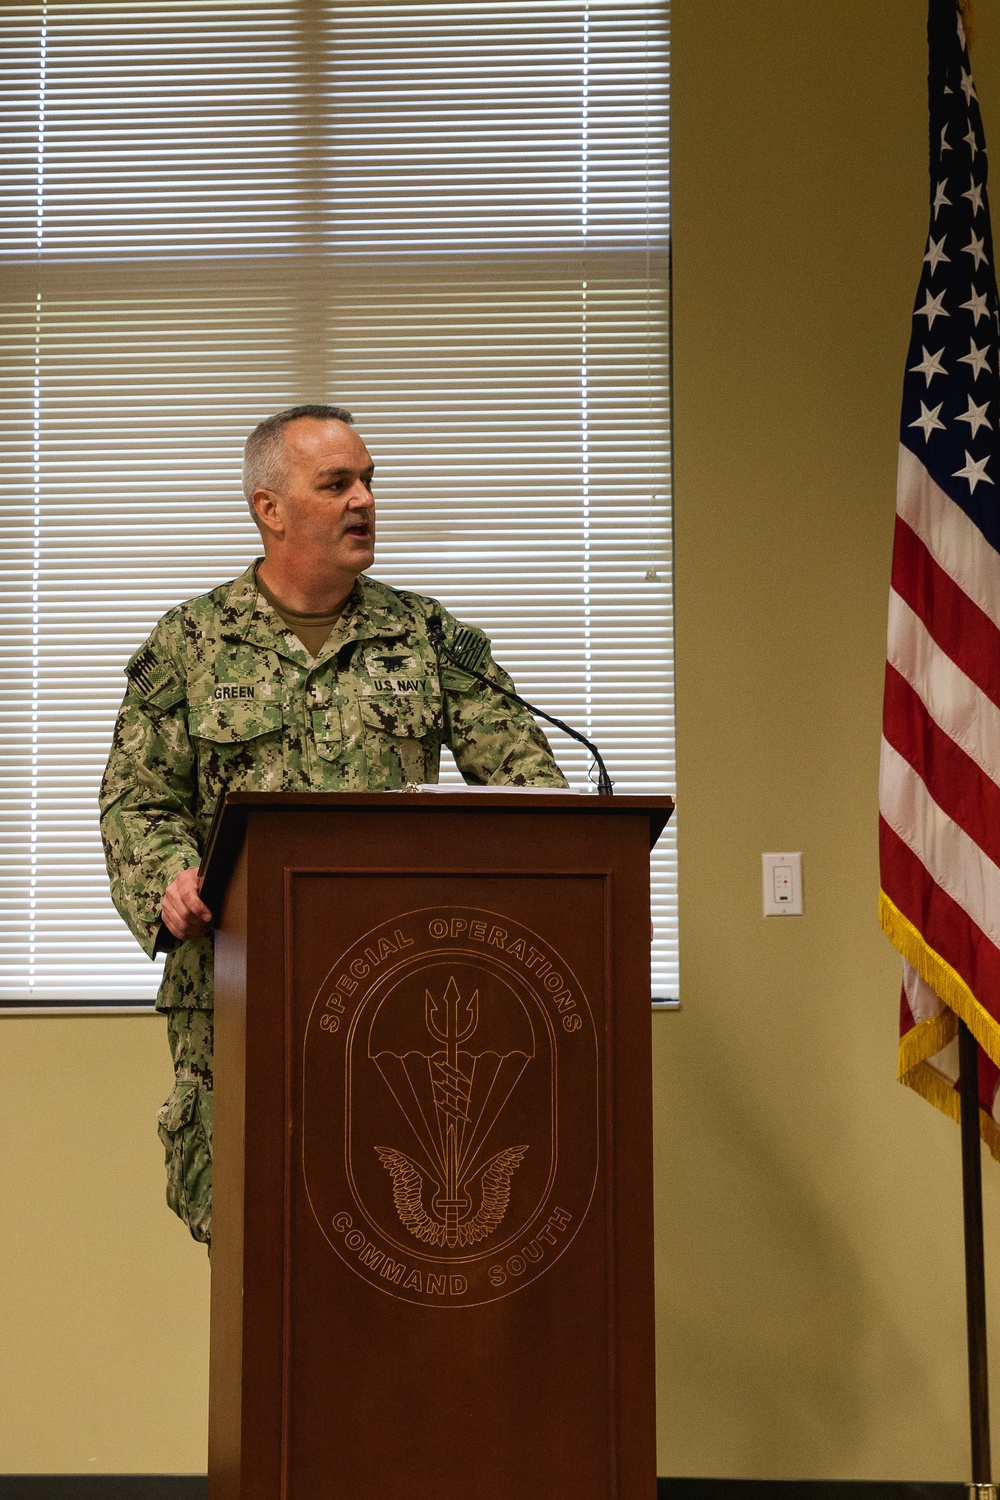 Navy SEAL Takes Helm at SOCSOUTH